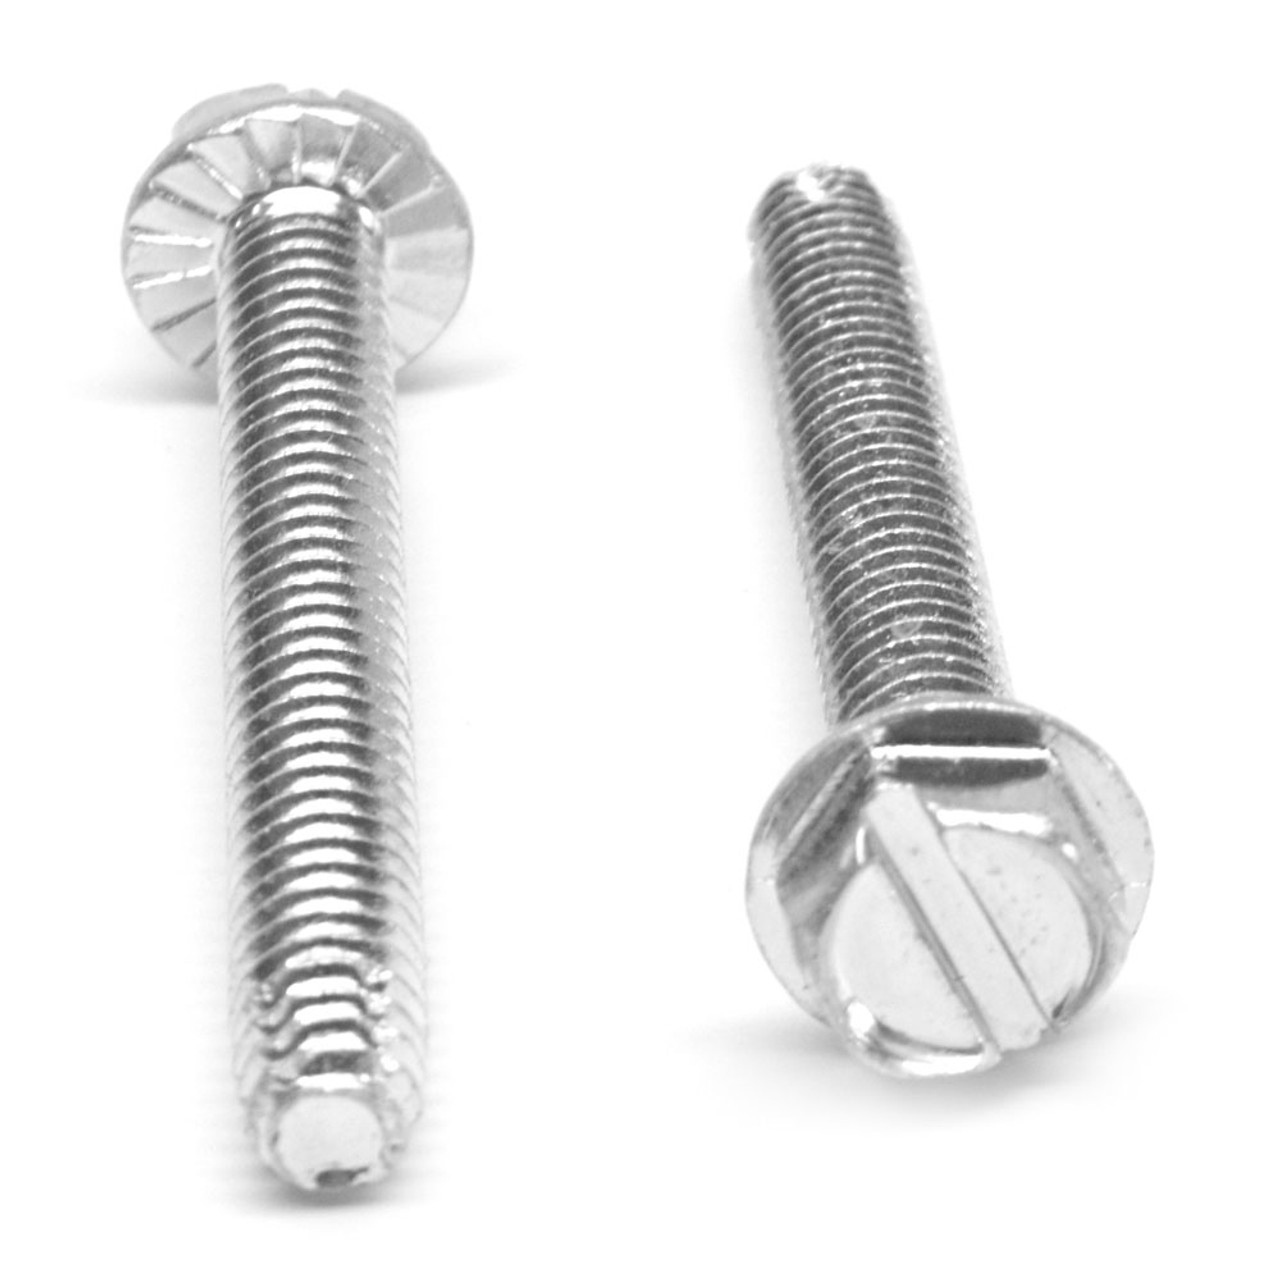 #8-32 x 2" (FT) Coarse Thread Thread Cutting Screw Slotted Hex Washer Head with Serration Type F Low Carbon Steel Zinc Plated